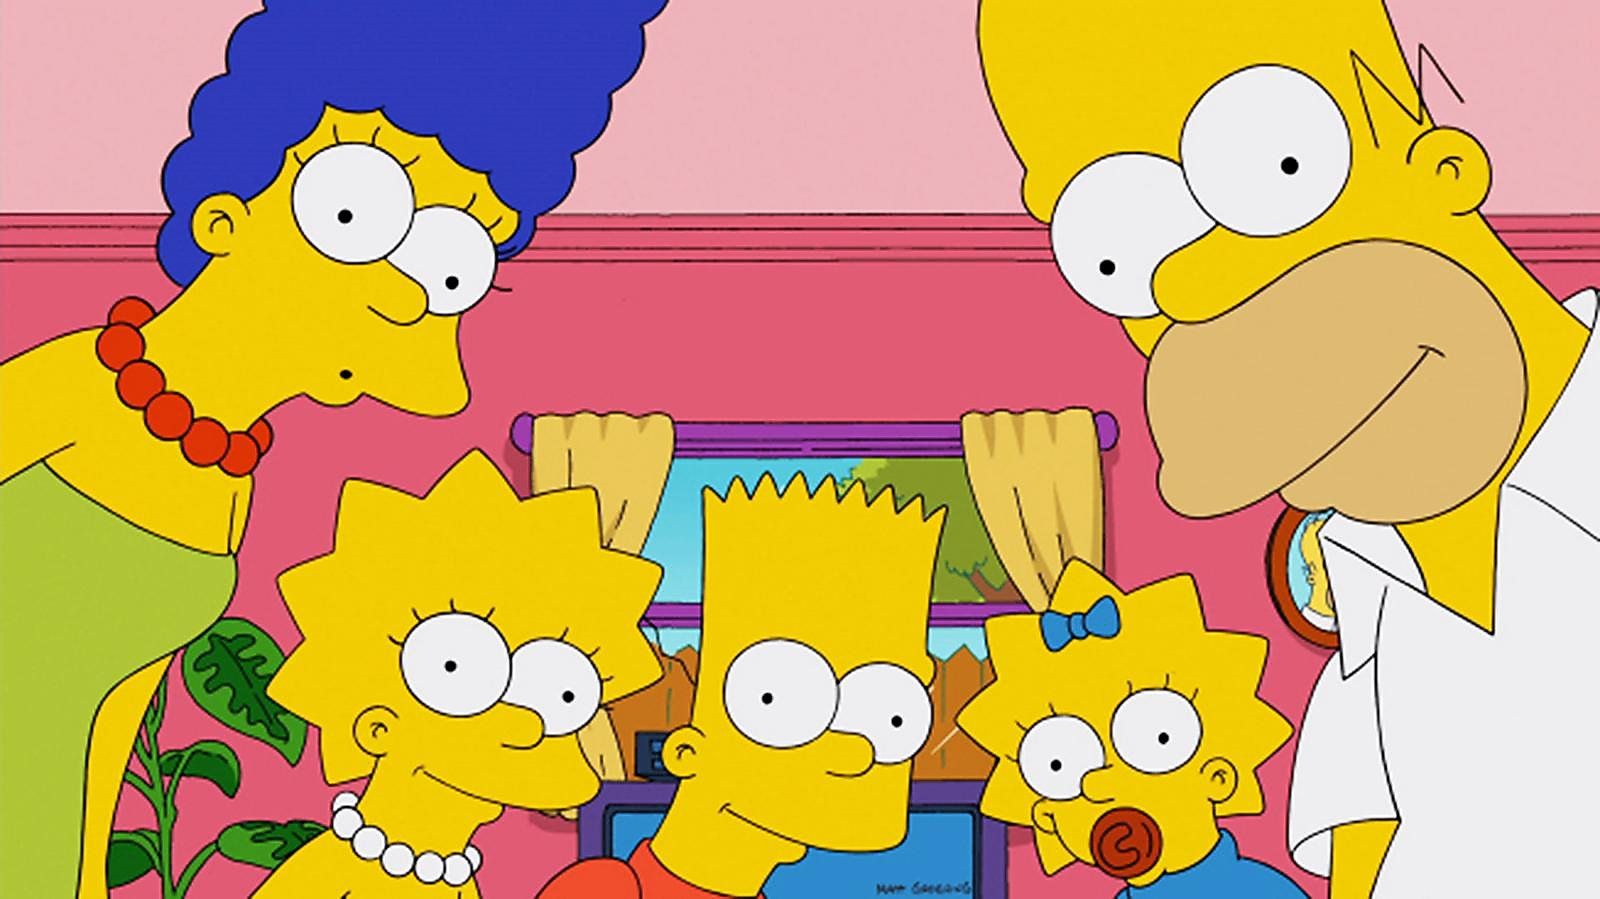 The Simpsons family is shown in a still from the show. - Bart Simpson